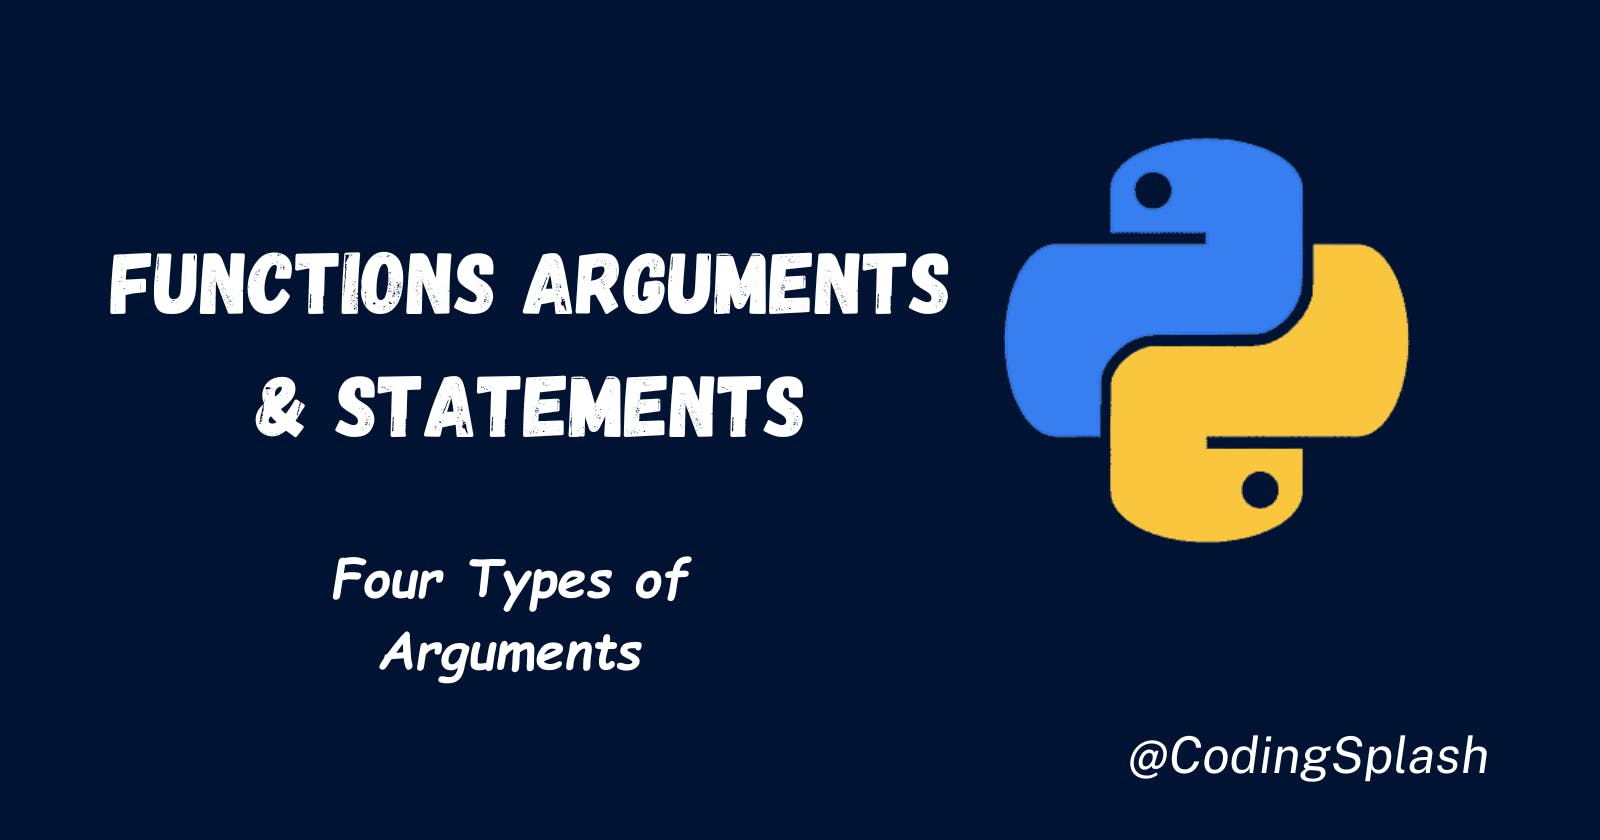 Day 21 - Function Arguments and Statements